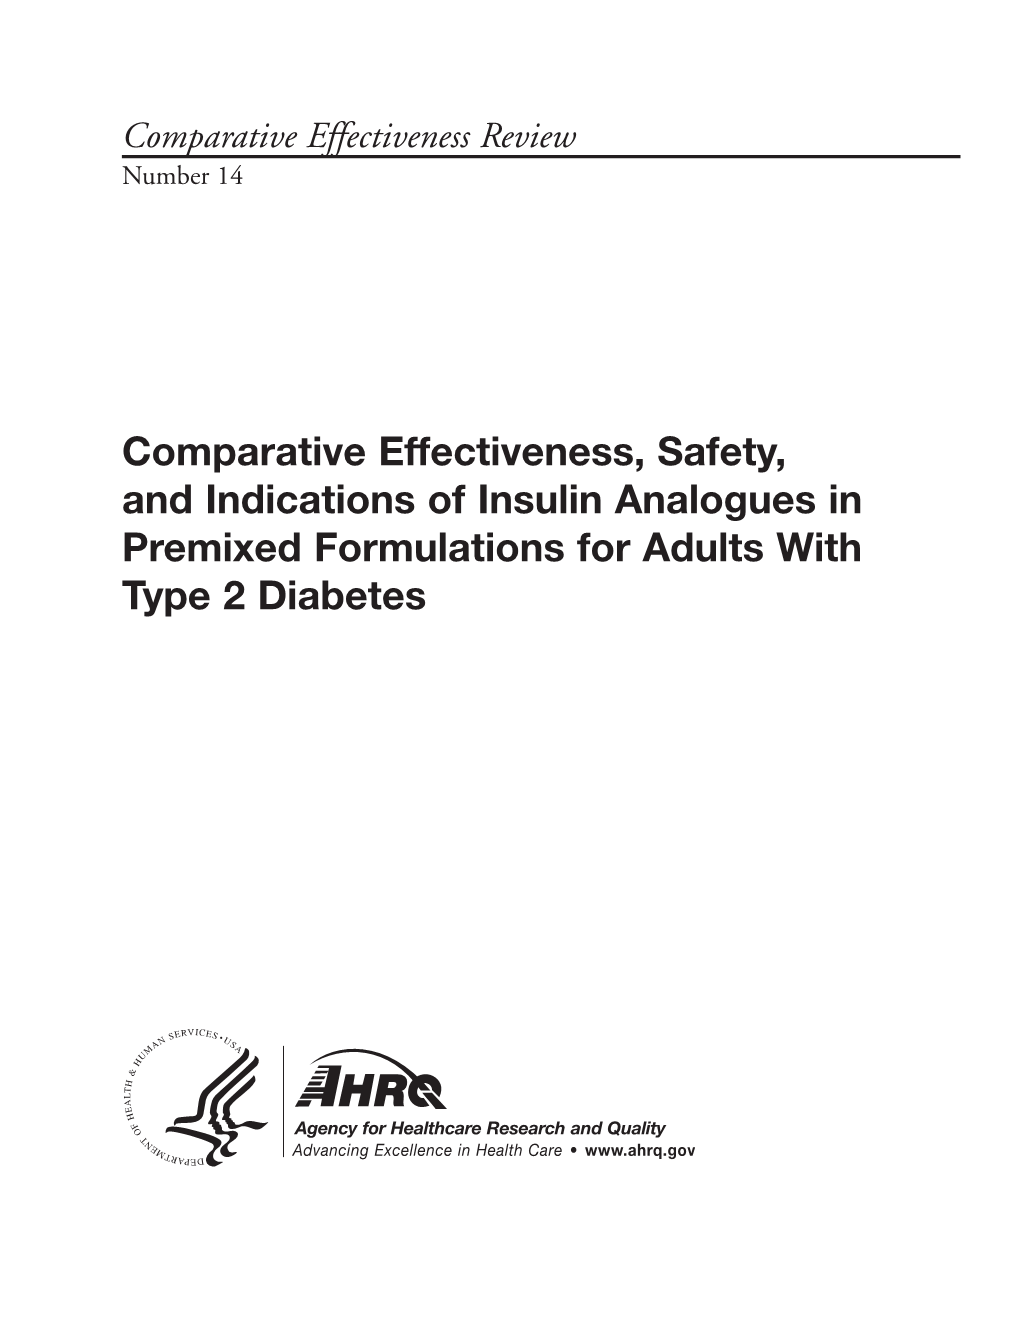 Comparative Effectiveness, Safety, and Indications of Insulin Analogues in Premixed Formulations for Adults with Type 2 Diabetes